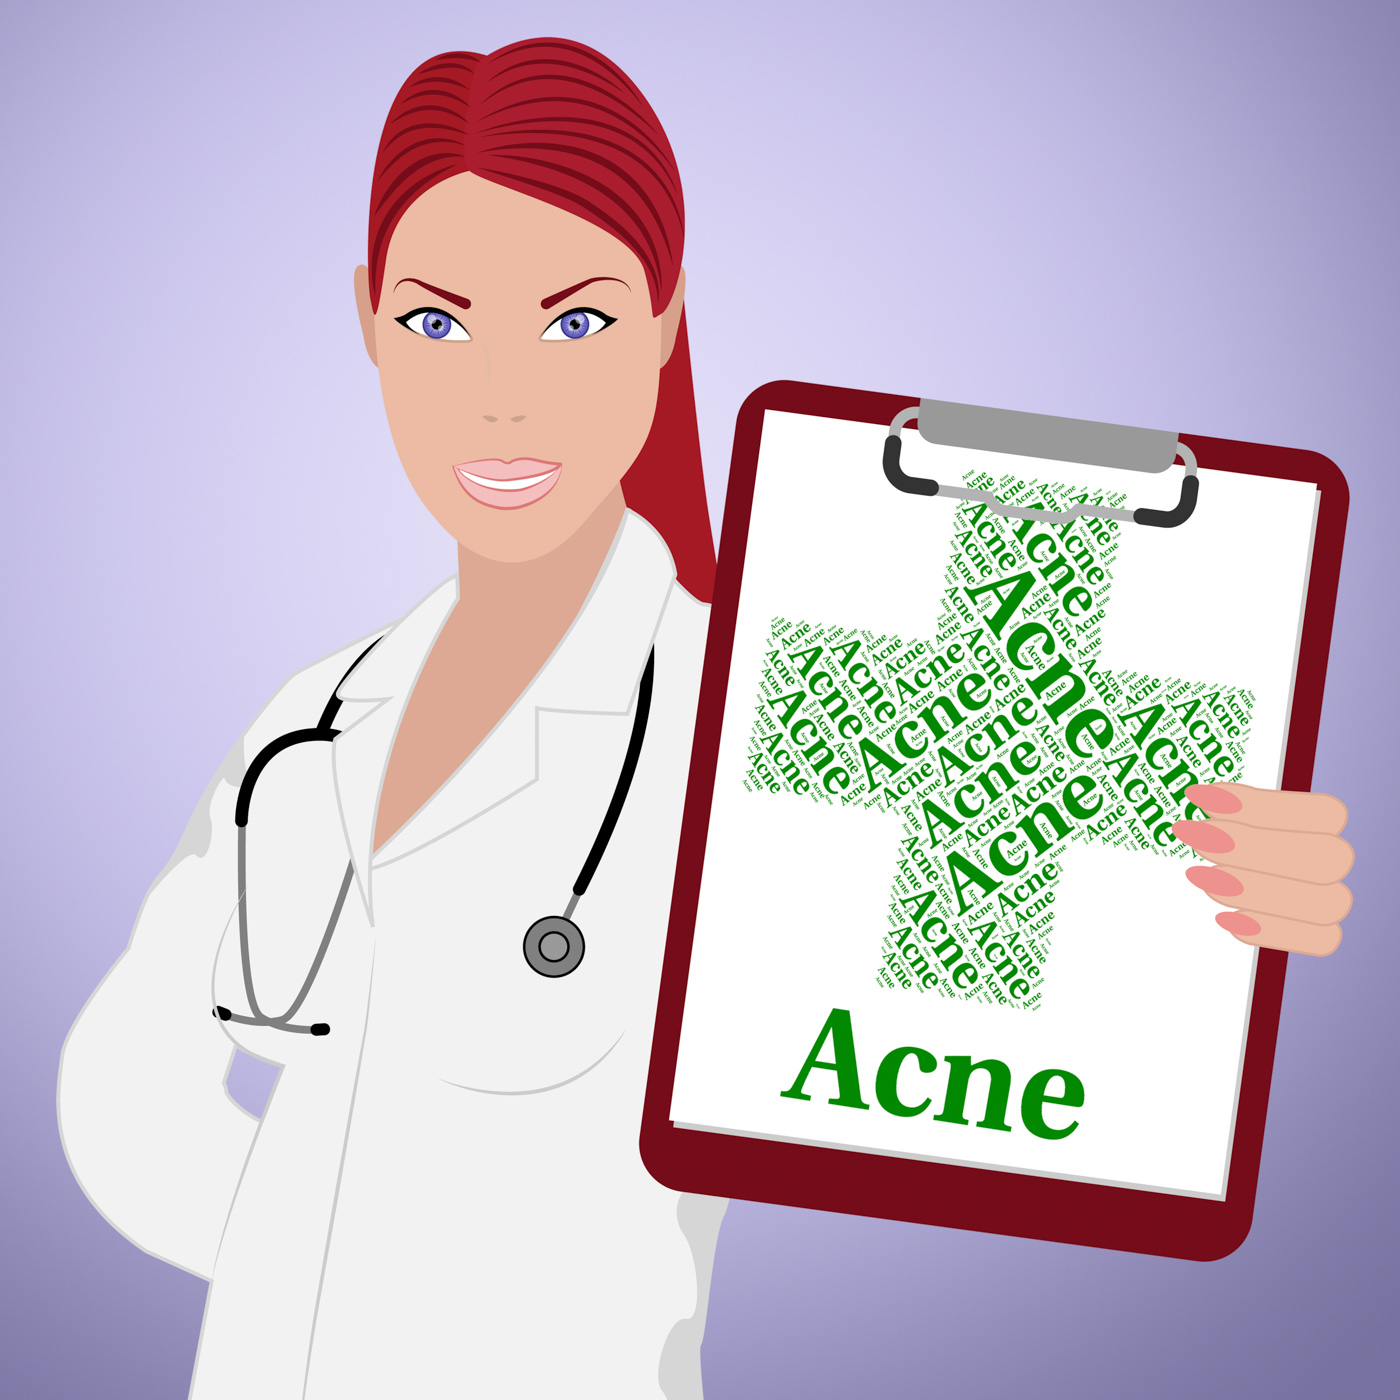 Acne word indicates ill health and affliction photo